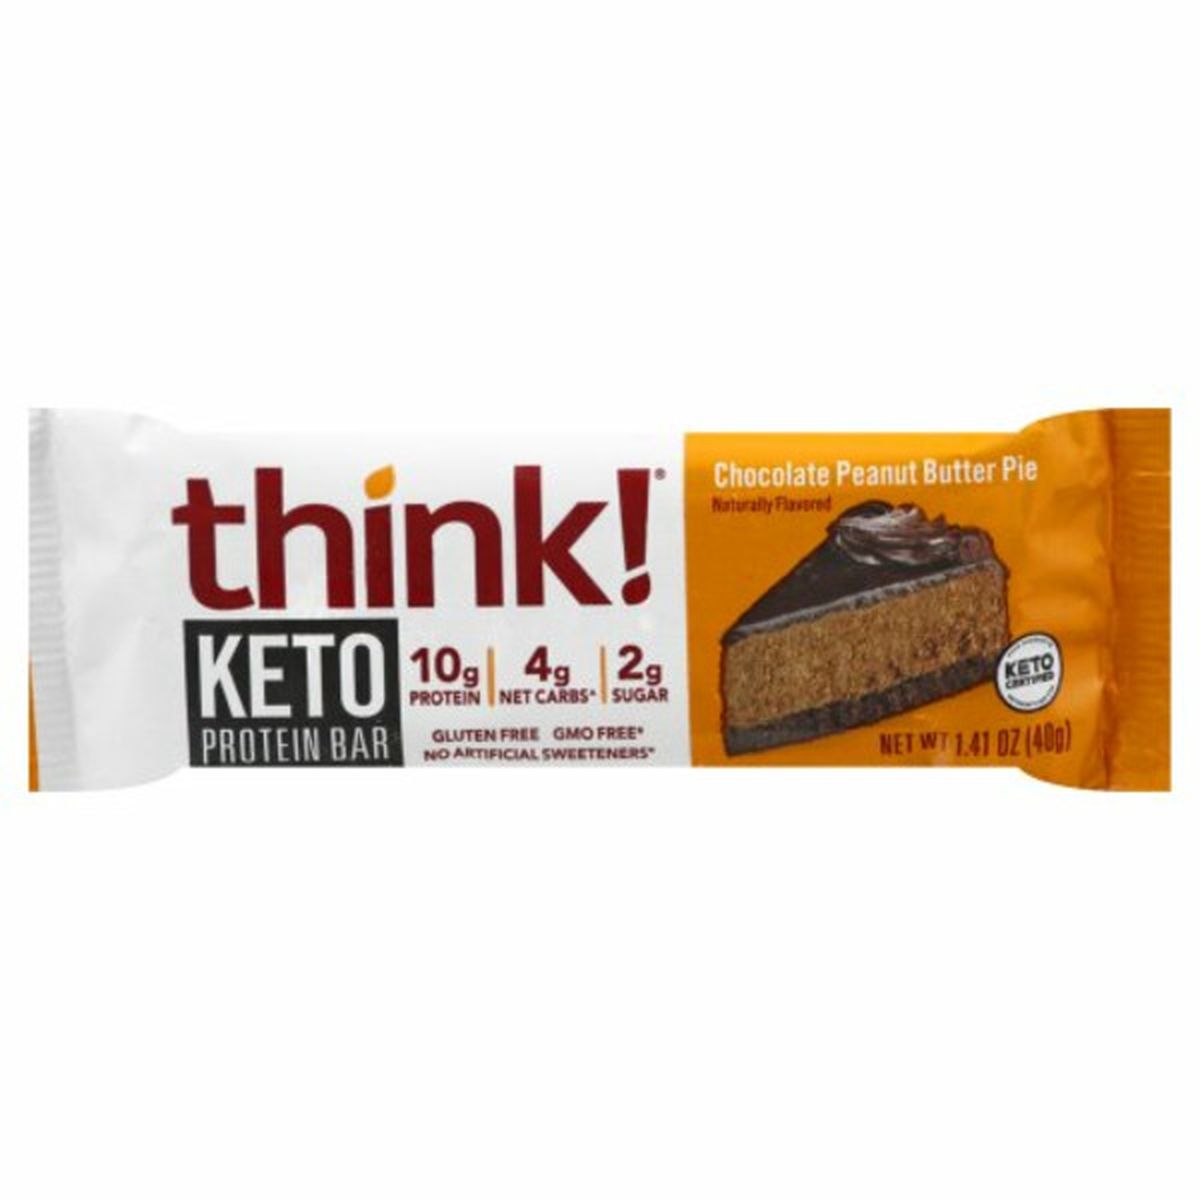 Calories in Think! Protein Bar, Keto, Chocolate Peanut Butter Pie